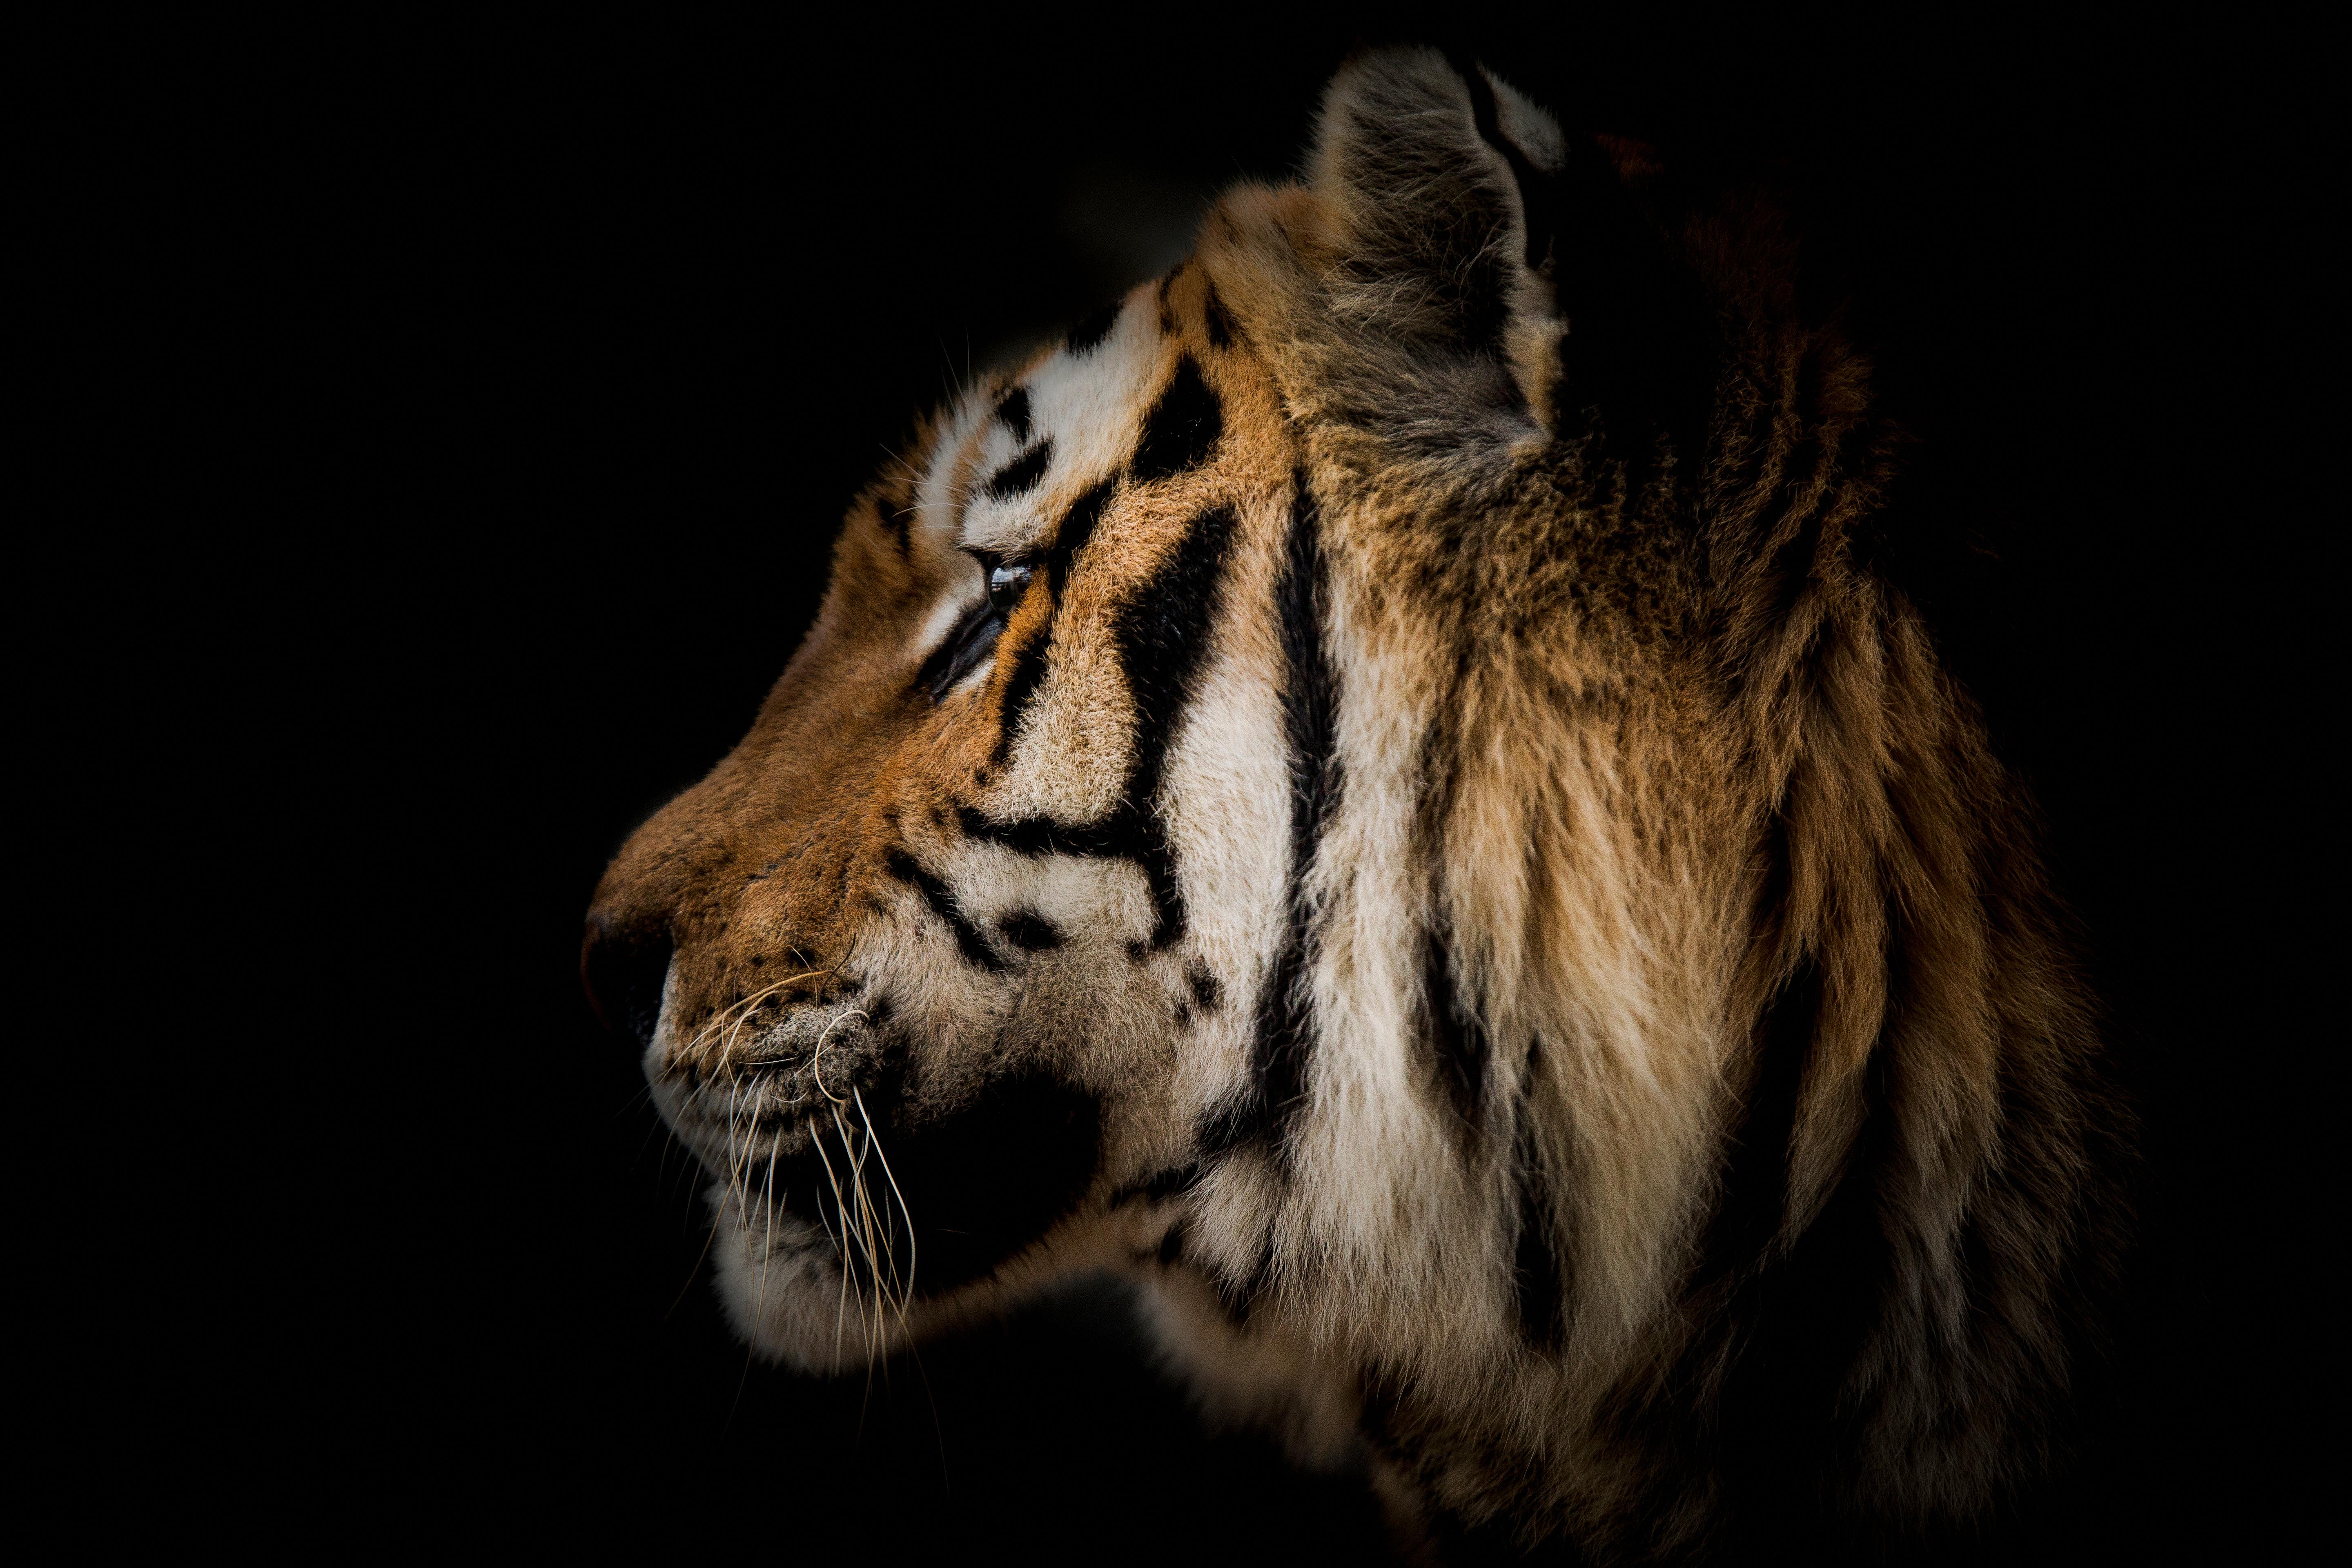 Shane Russeck Black and White Photograph - 36x48 Tiger Photography Wildlife Art Photograph "Tiger Portrait" Fine Art